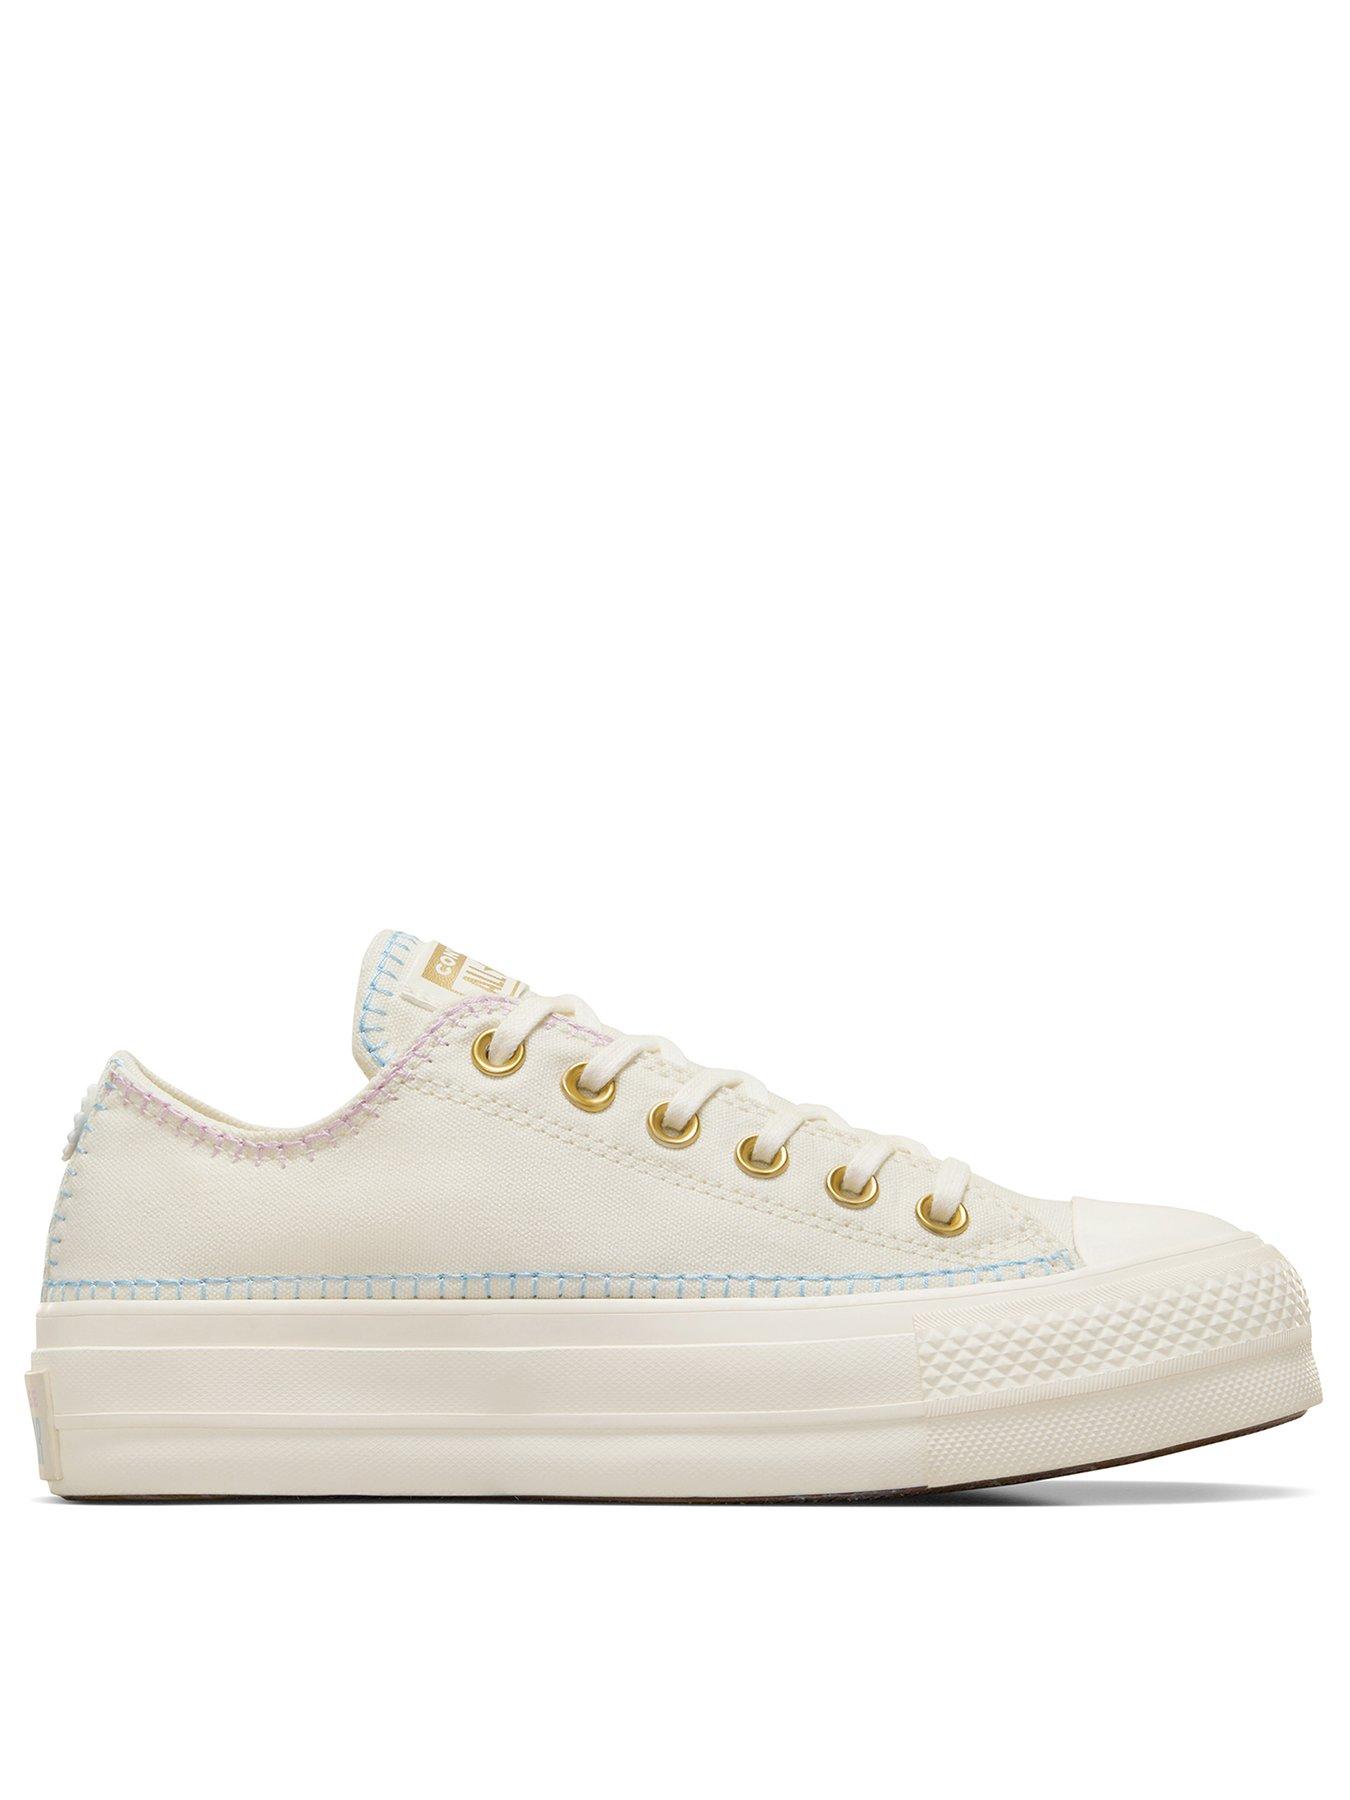 Converse Womens Lift Stitch Sich Ox Trainers - Off White, Off White, Size 6, Women